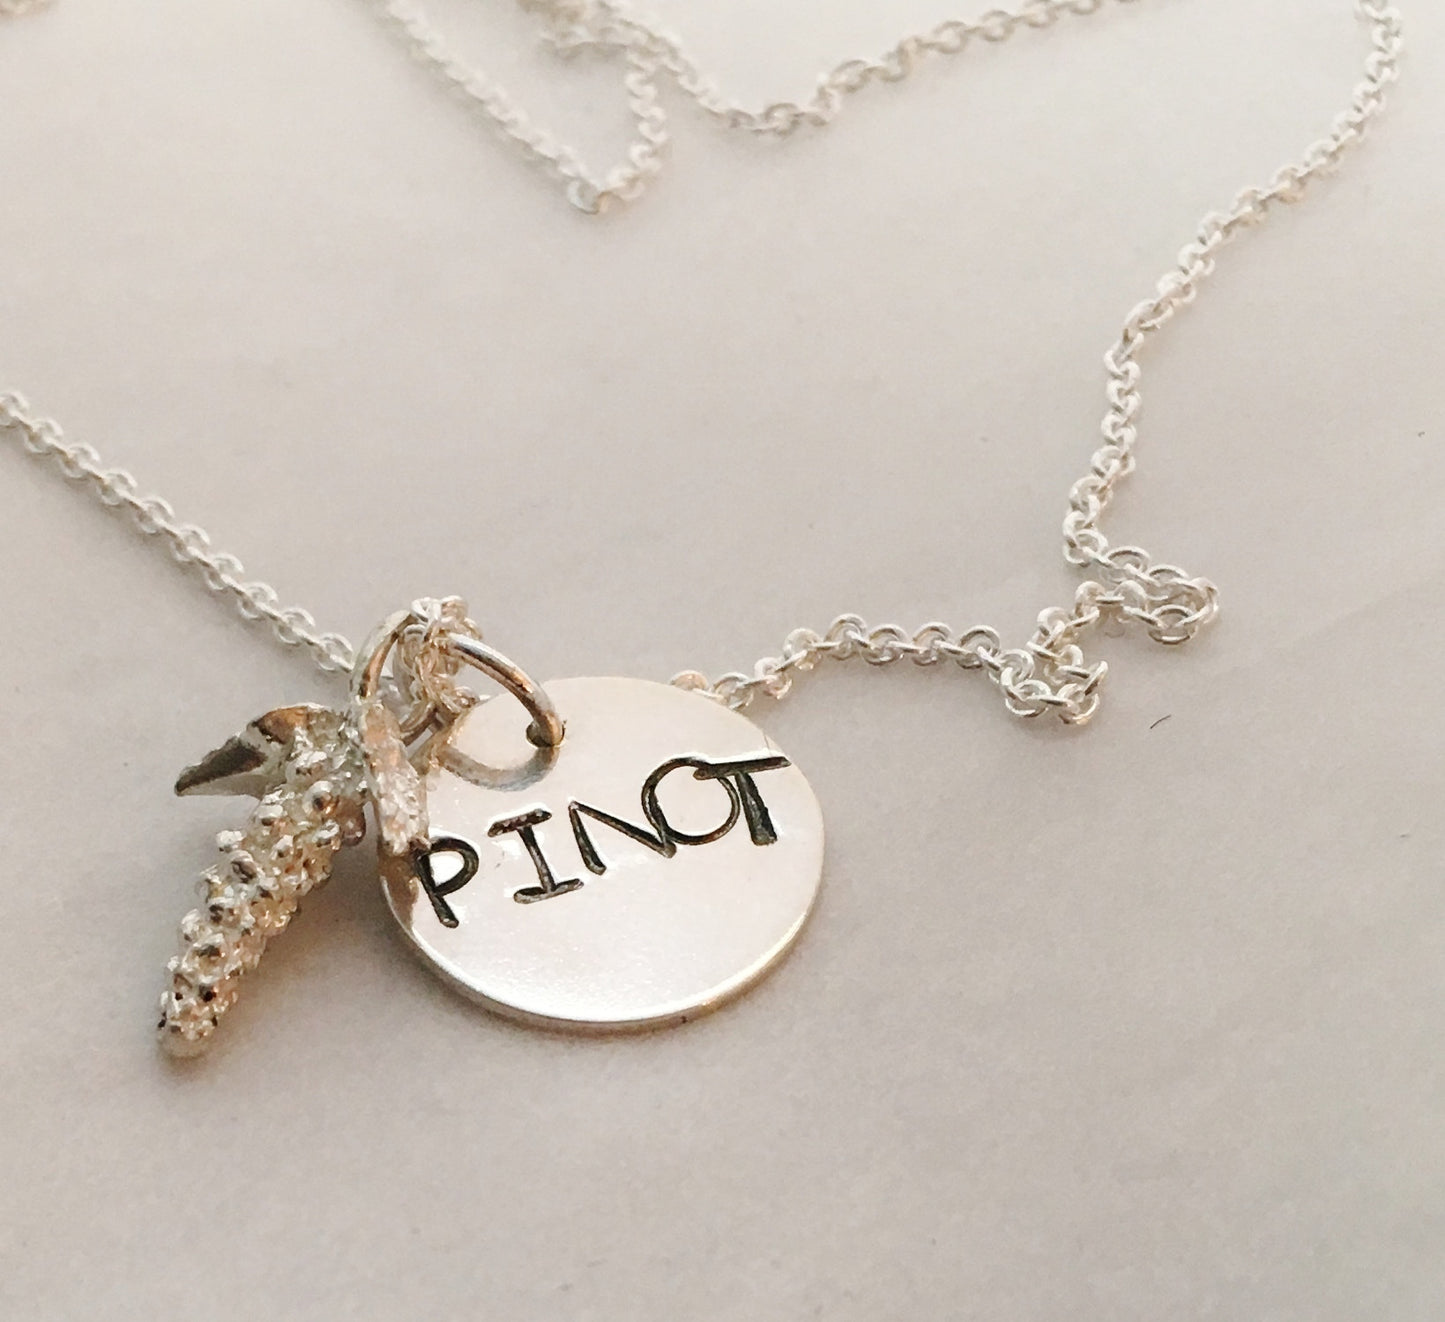 Hand Stamped Pinot Red Wine Charm in Sterling Silver